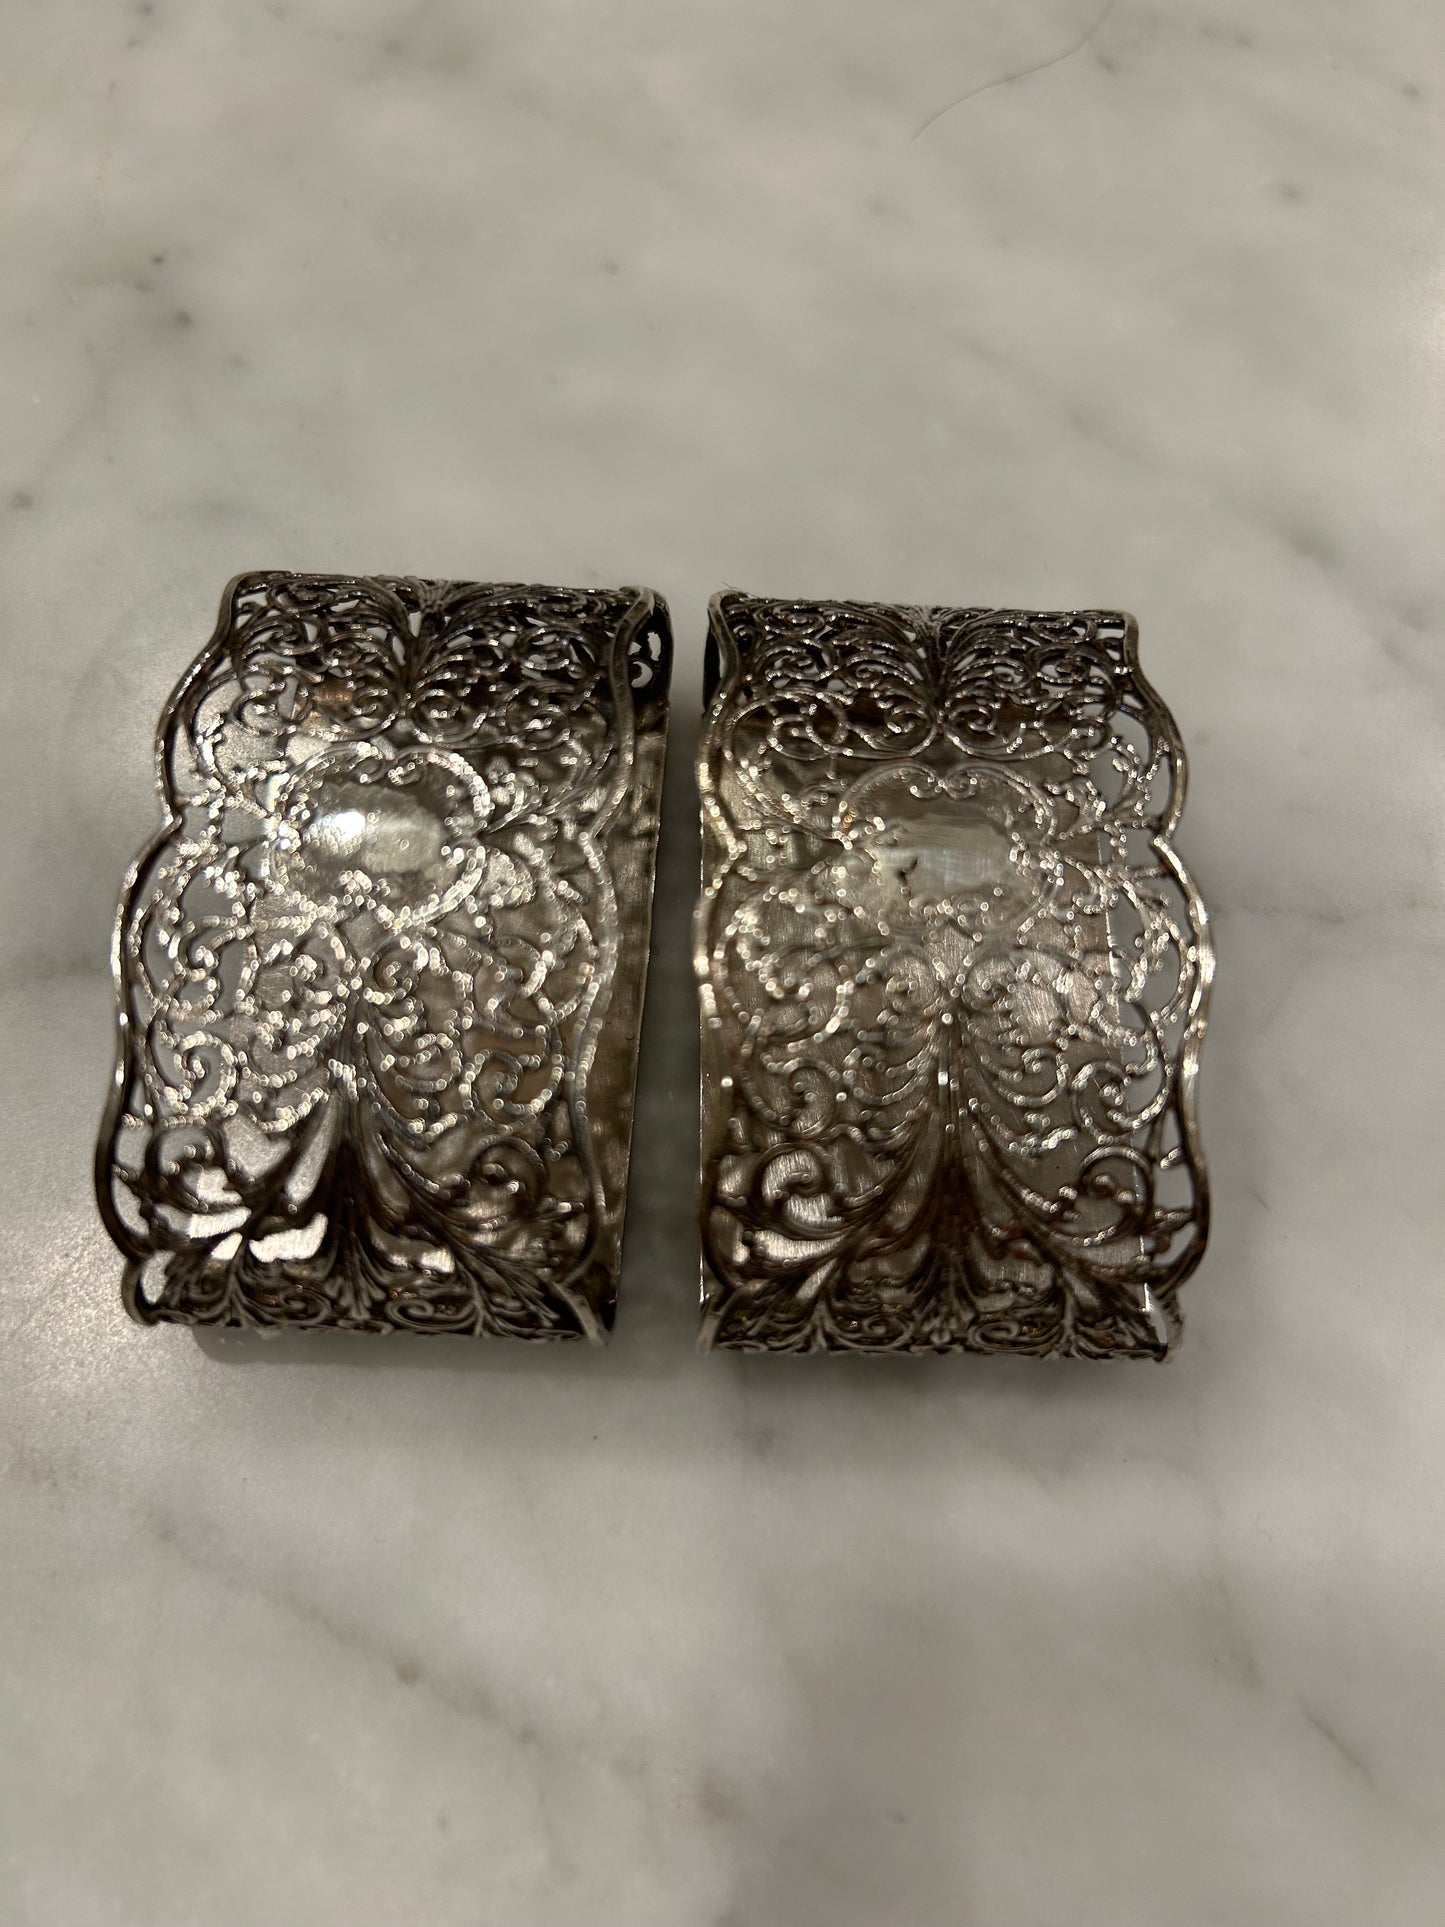 Stunning Antique Sterling Silver Pair of  Napkin Rings